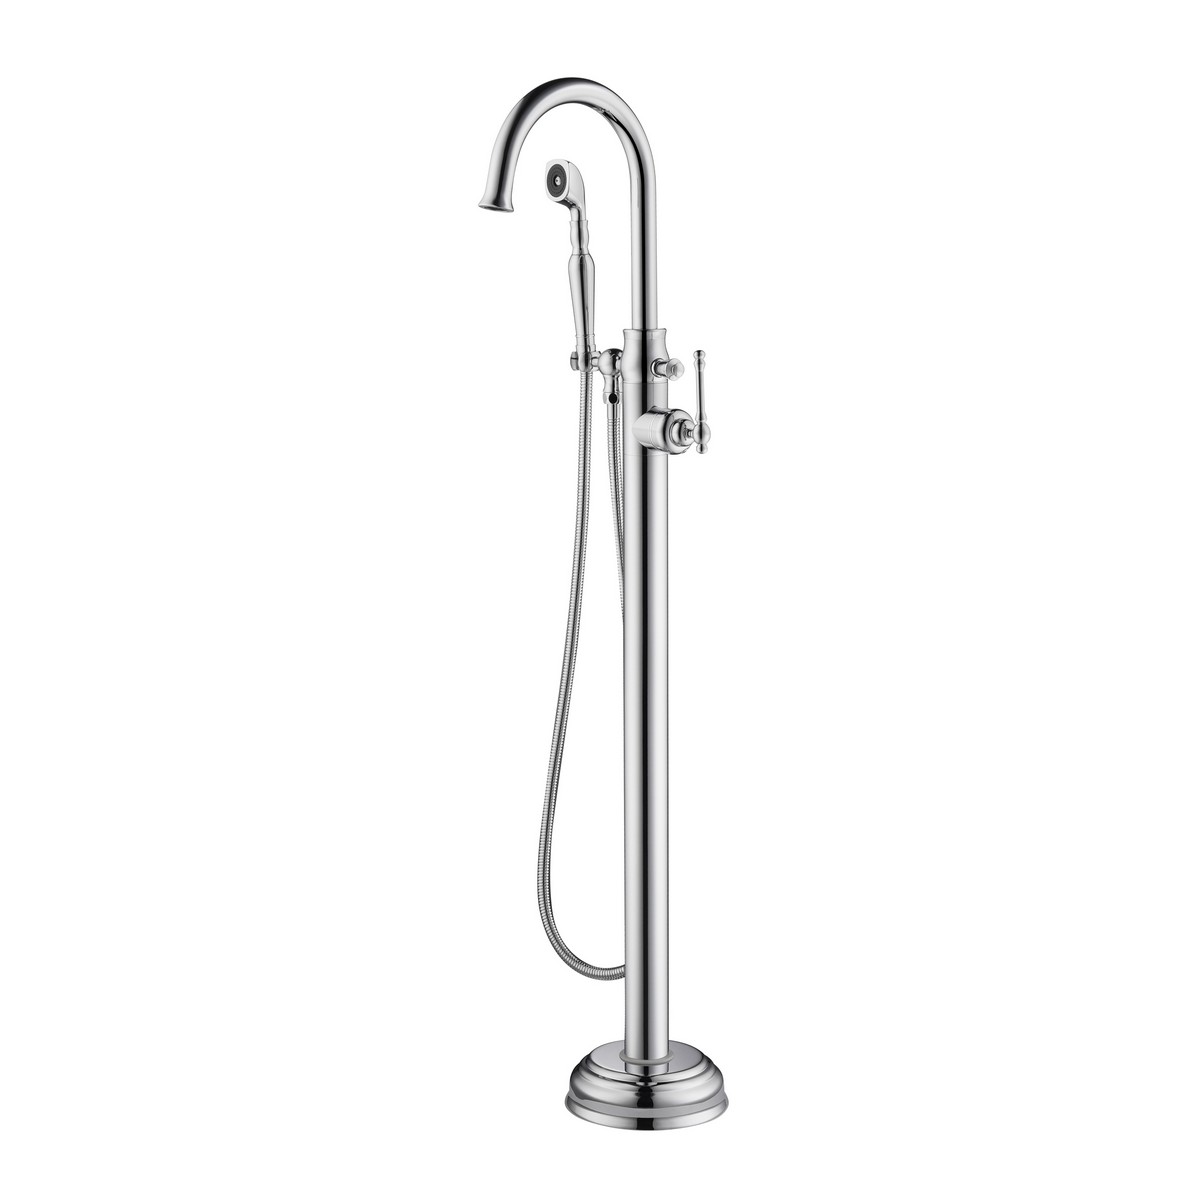 BARCLAY 7976 LEBARON 44 3/4 INCH FREESTANDING TUB FILLER WITH HAND SHOWER AND LEVER HANDLE